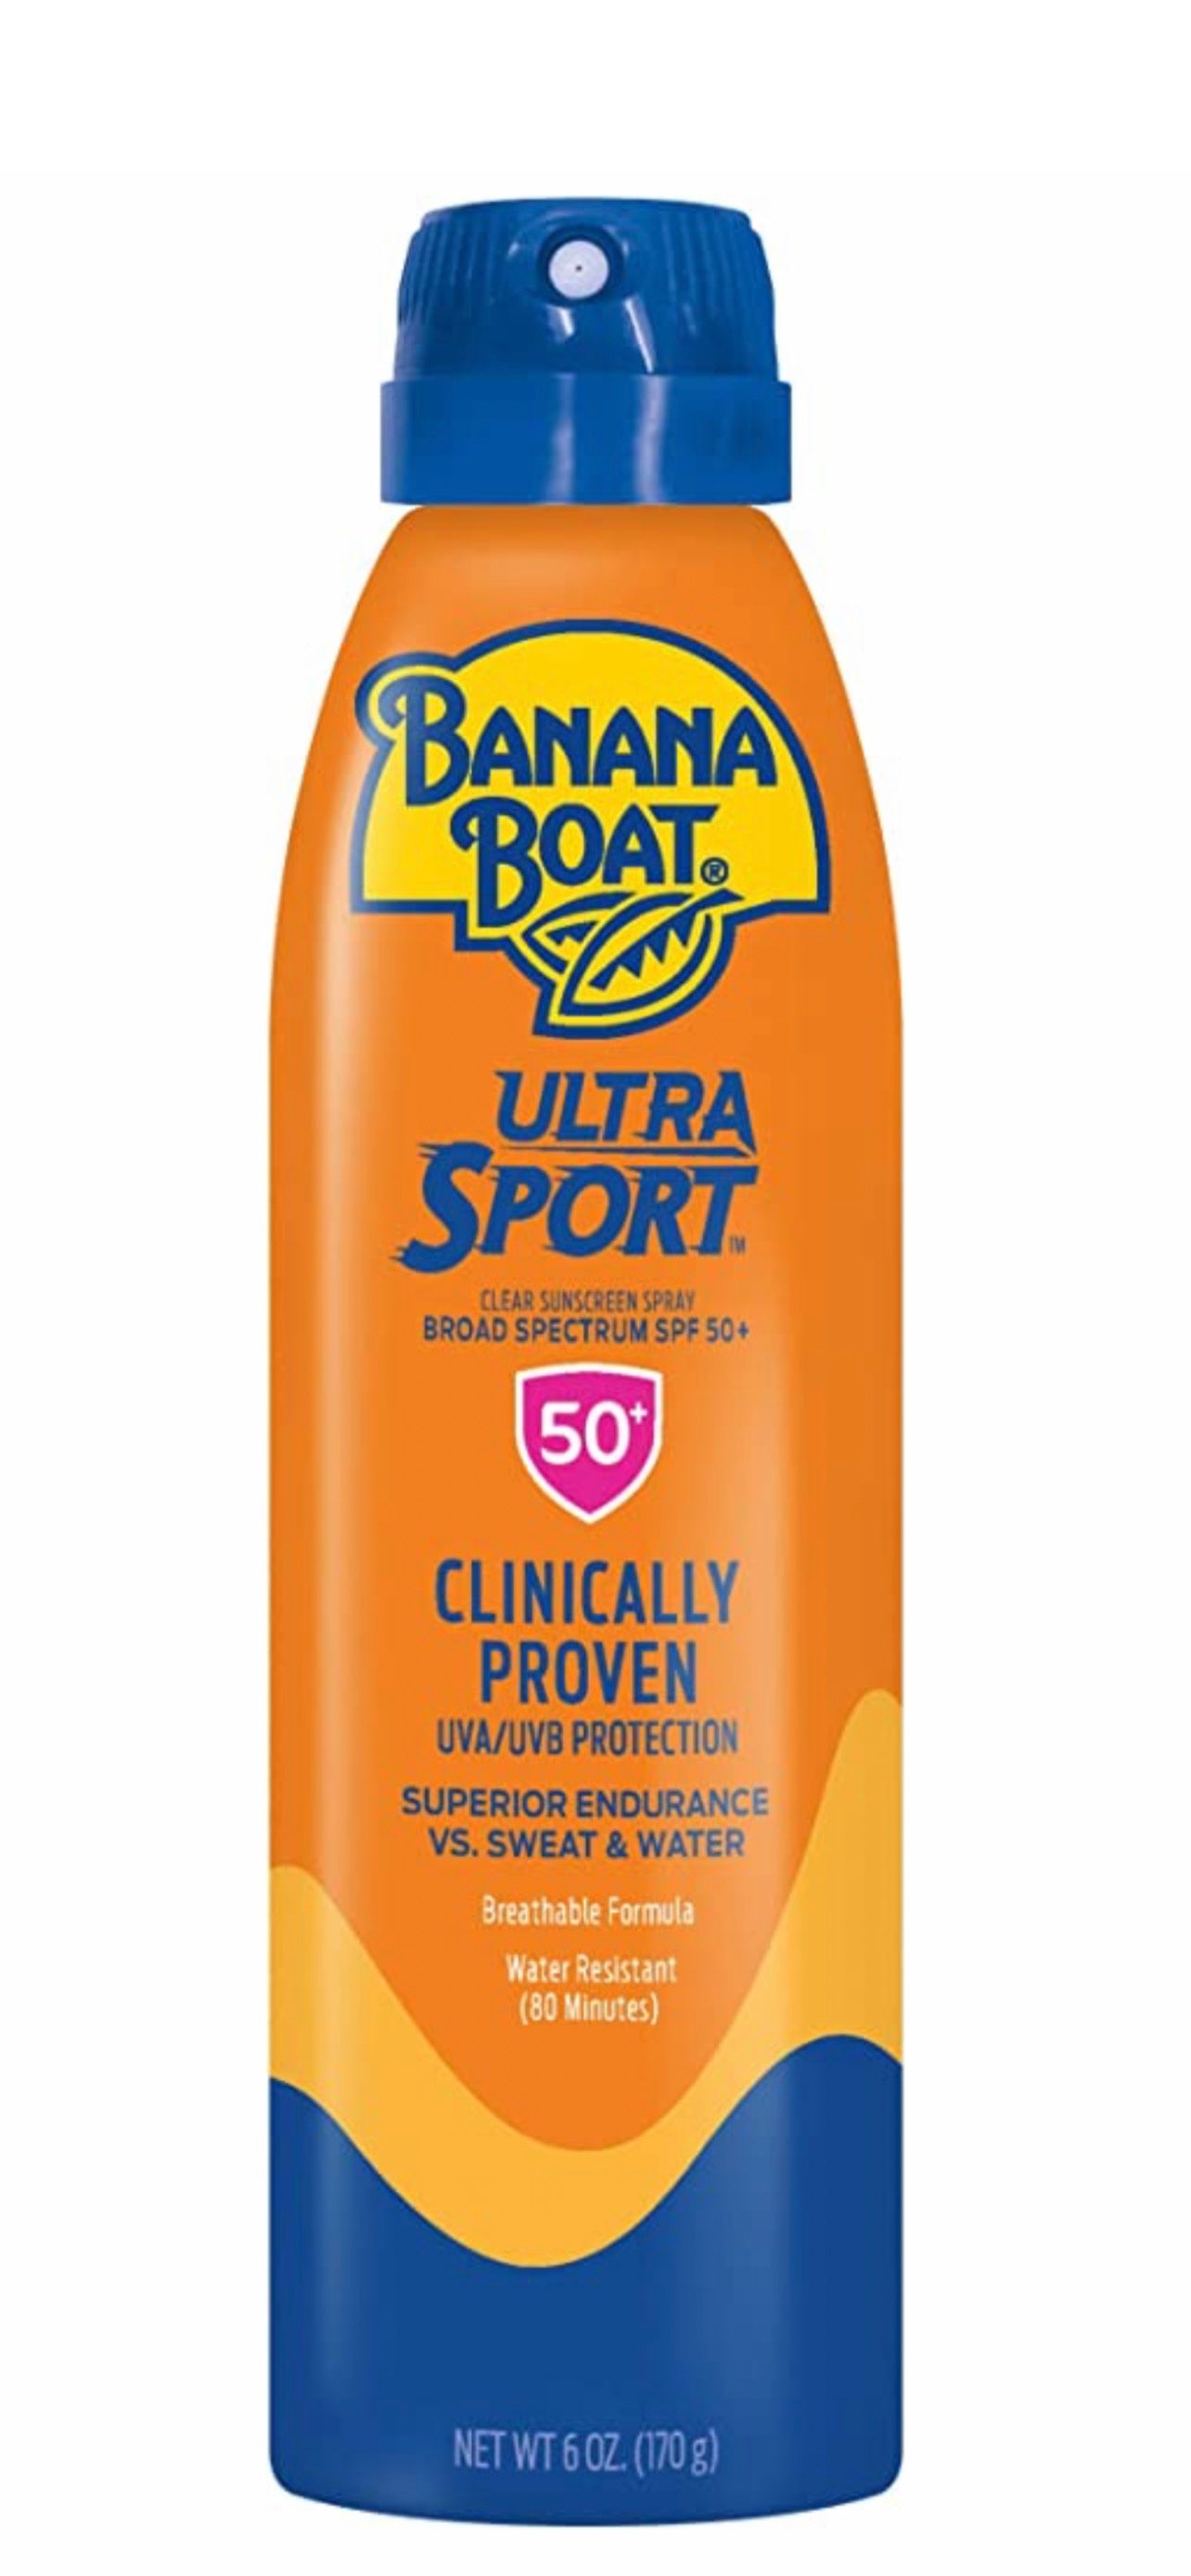 Banana Boat Sport Ultra SPF 50 Sunscreen Spray 8oz Oxybenzone Free Sunscreen, Sunblock Spray, Water Resistant - Supporting ORCRF.org